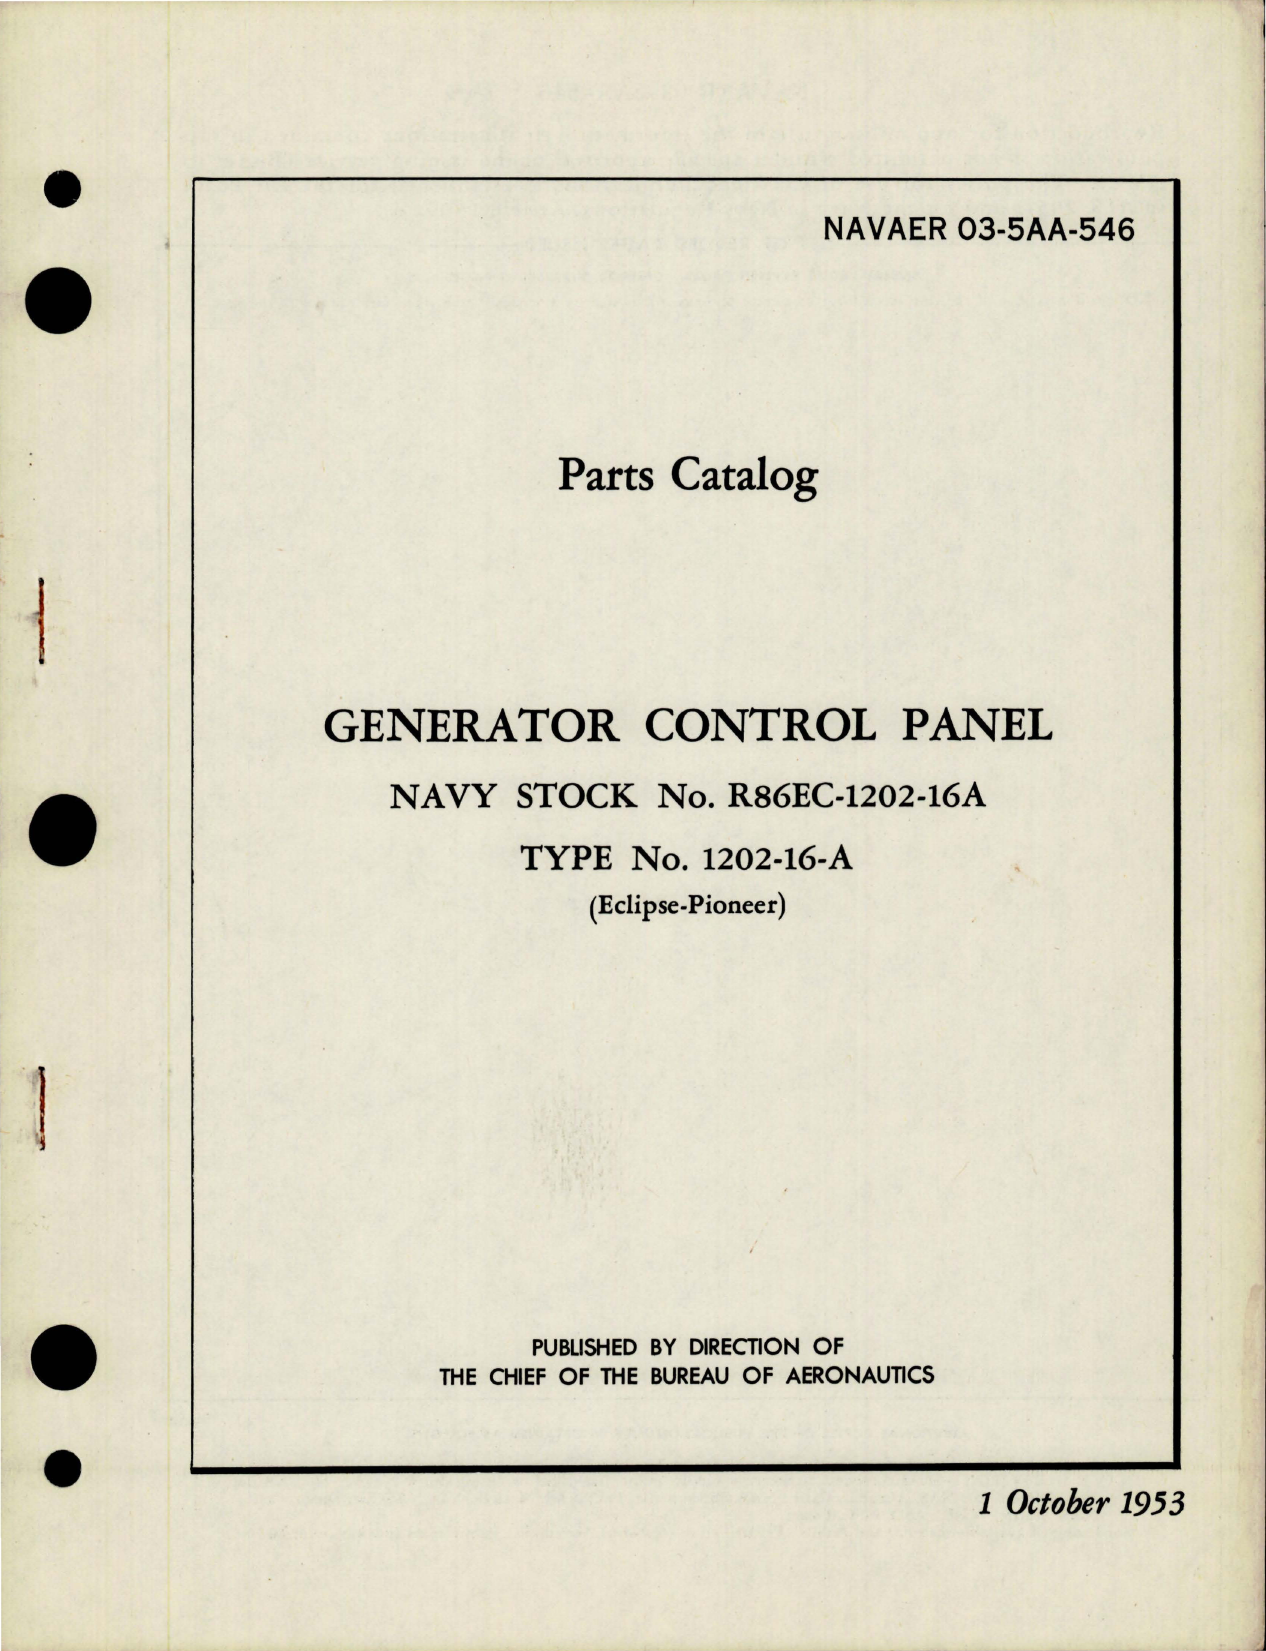 Sample page 1 from AirCorps Library document: Parts Catalog for Generator Control Panel - Type 1202-16-A 